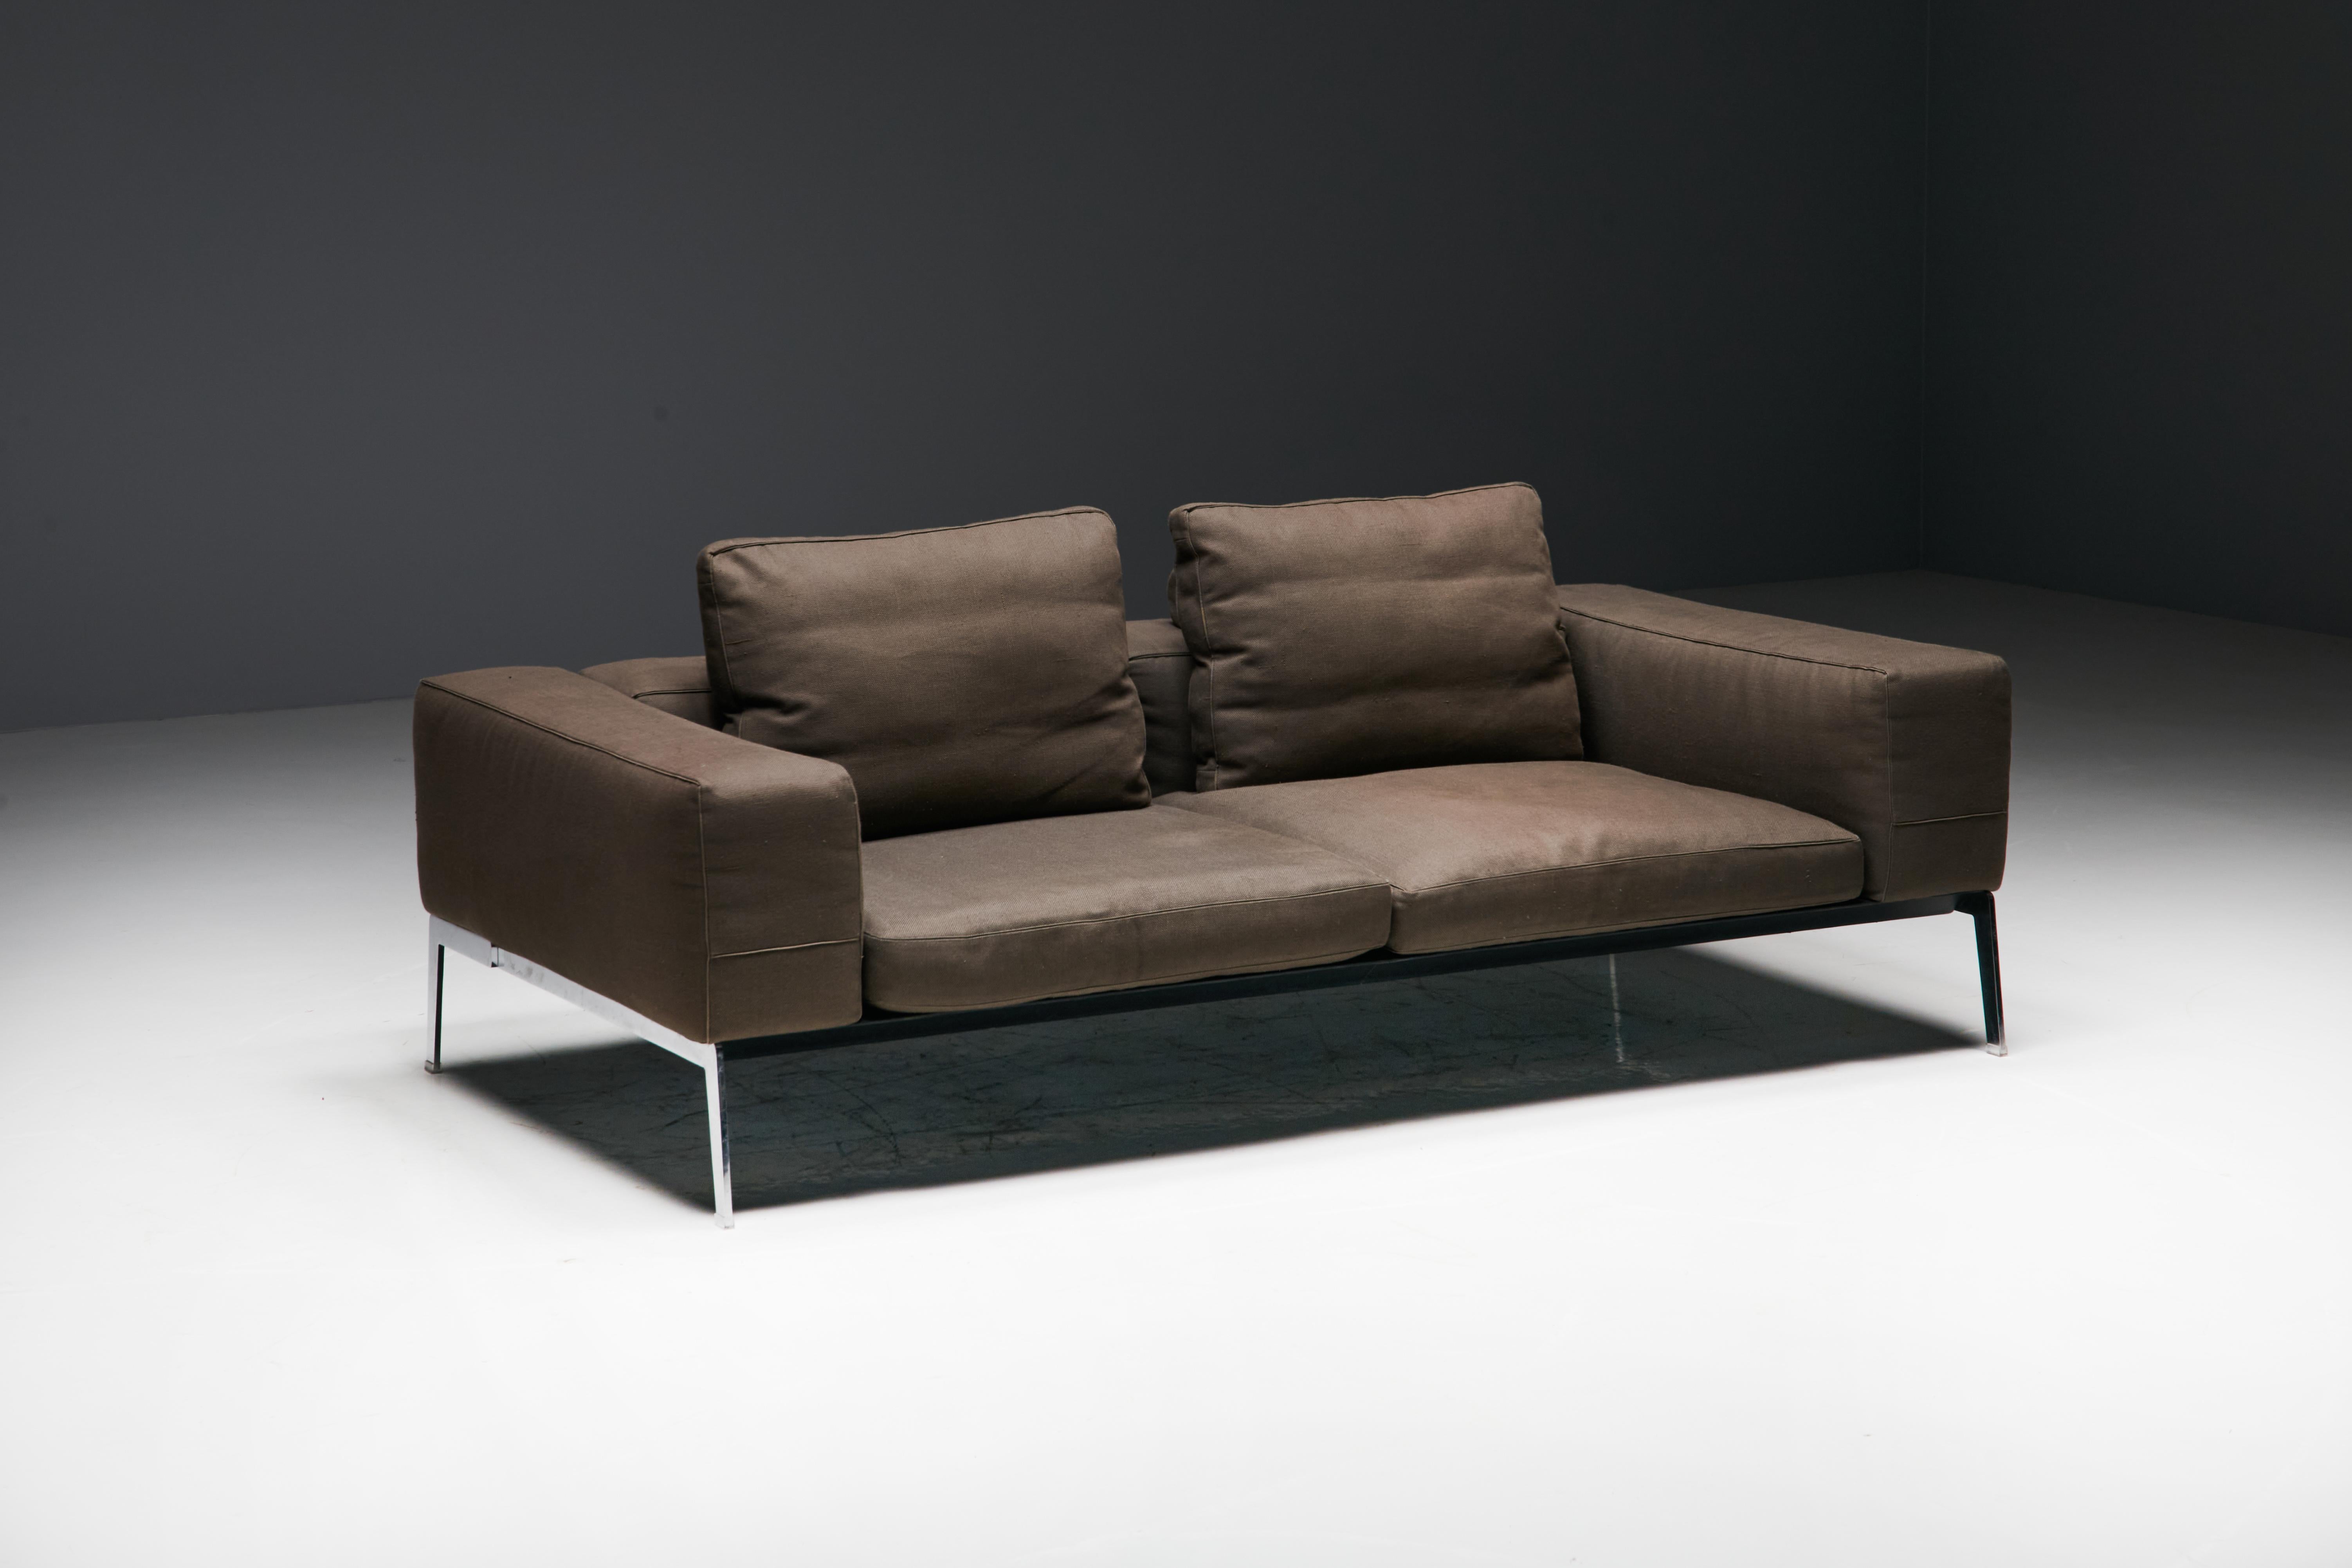 Lifesteel two-seater sofa by Antonio Citterio for Flexform, the embodiment of contemporary luxury and timeless design. The Lifesteel sofa features a striking metal base and finely upholstered frame, designed with a keen eye for aesthetics and